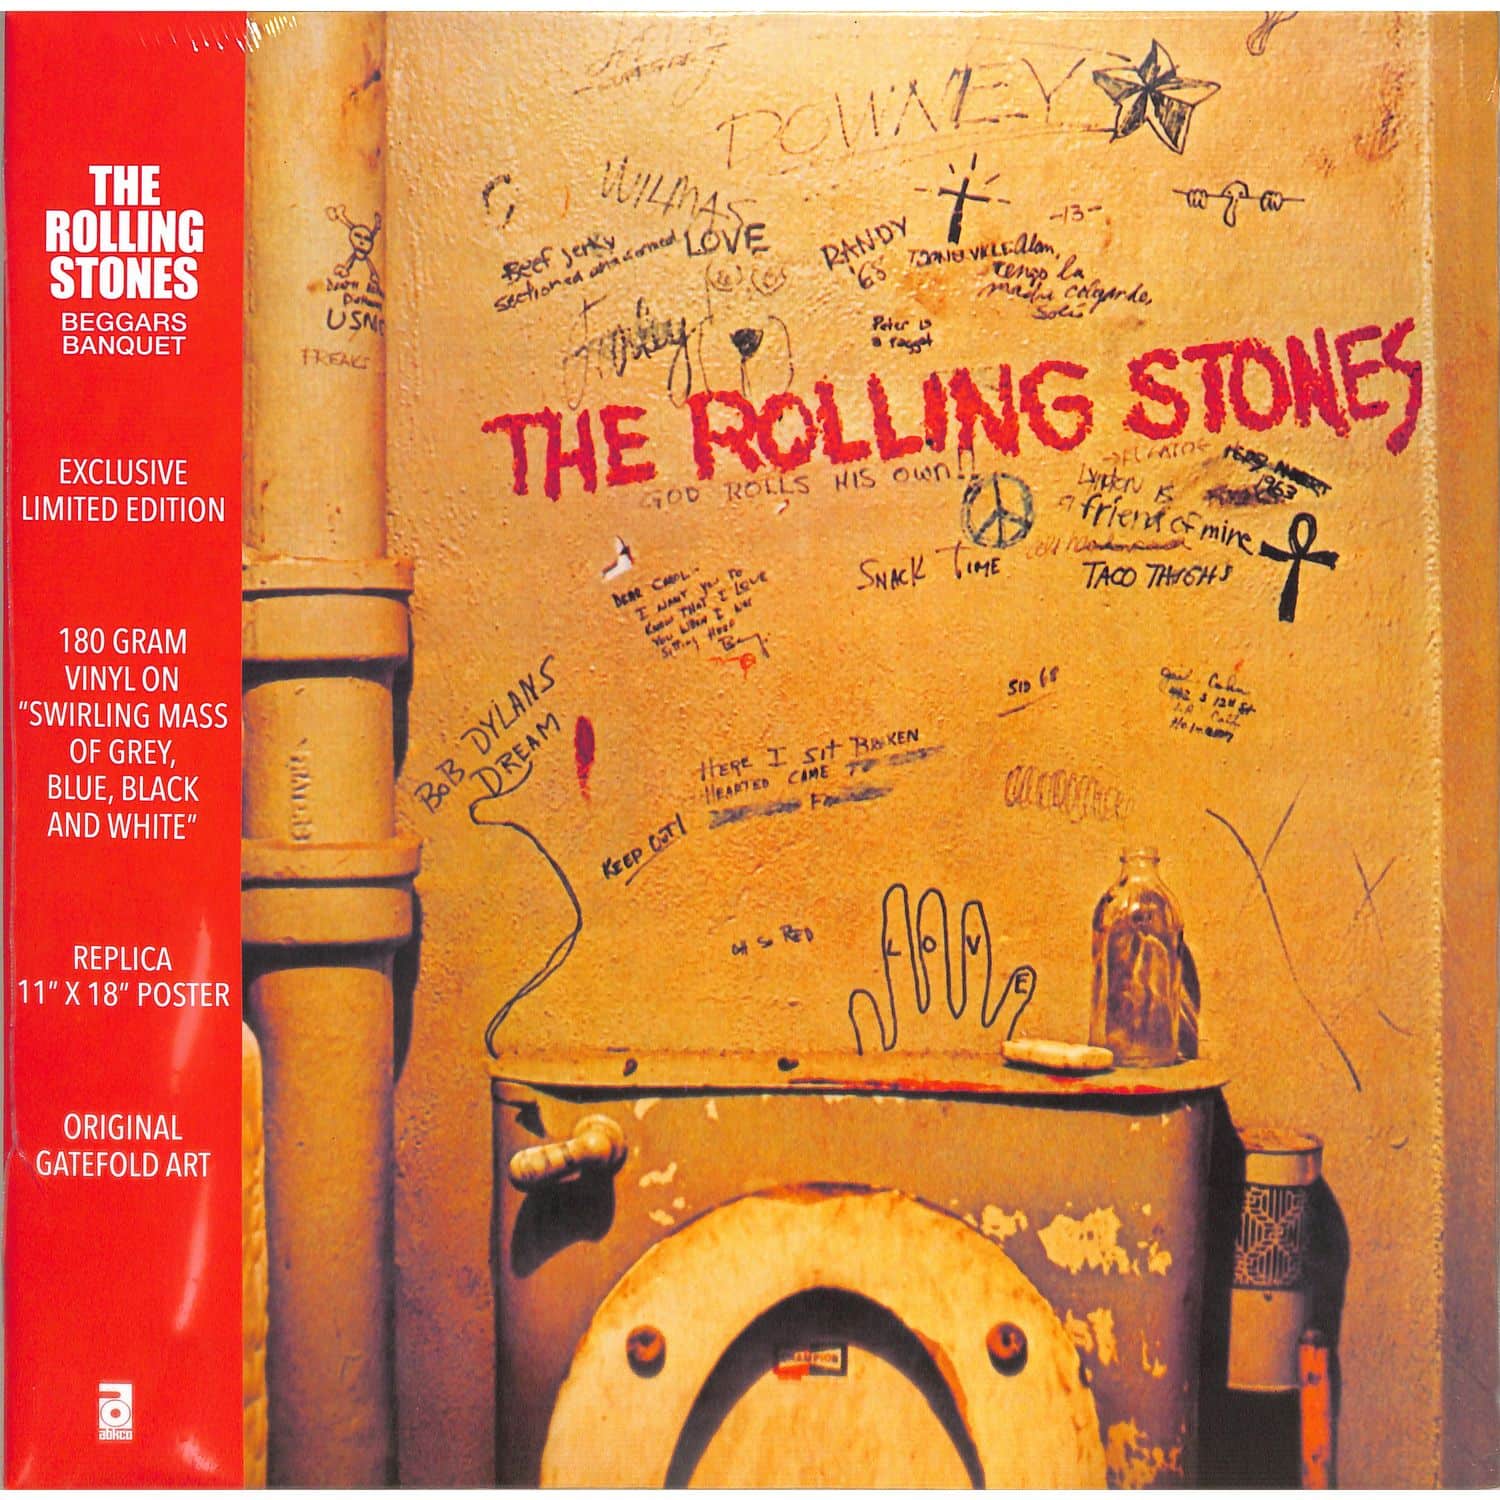 The Rolling Stones - BEGGARS BANQUET